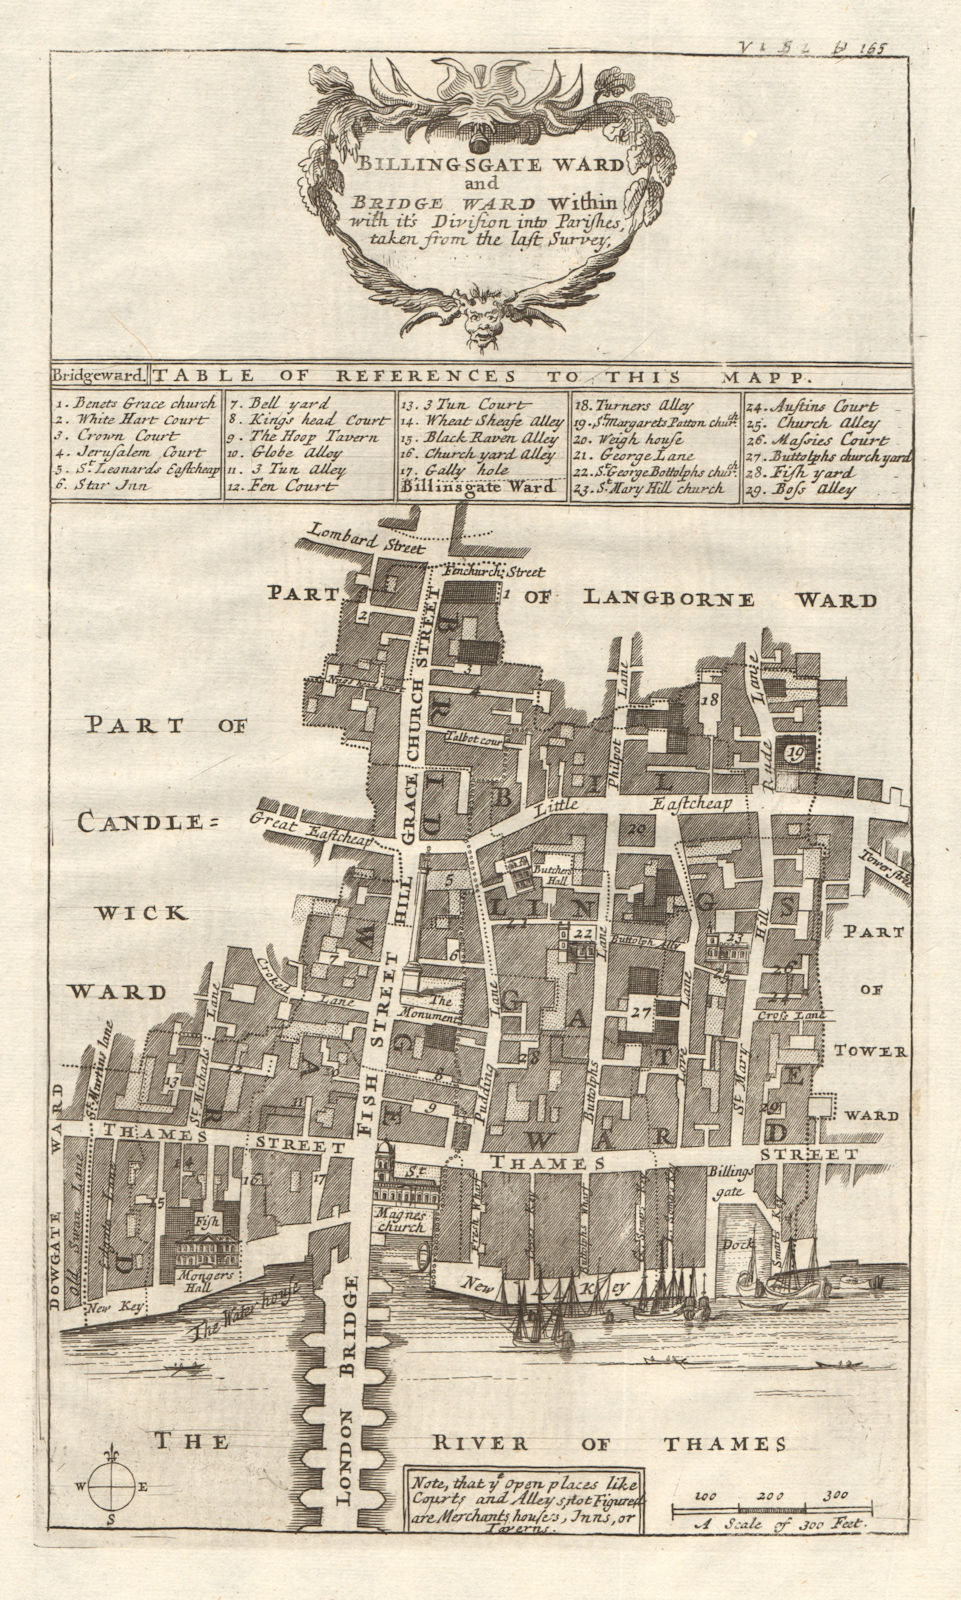 'Billingsgate Ward and Bridge Ward Within'. City of London. STOW/STRYPE 1720 map